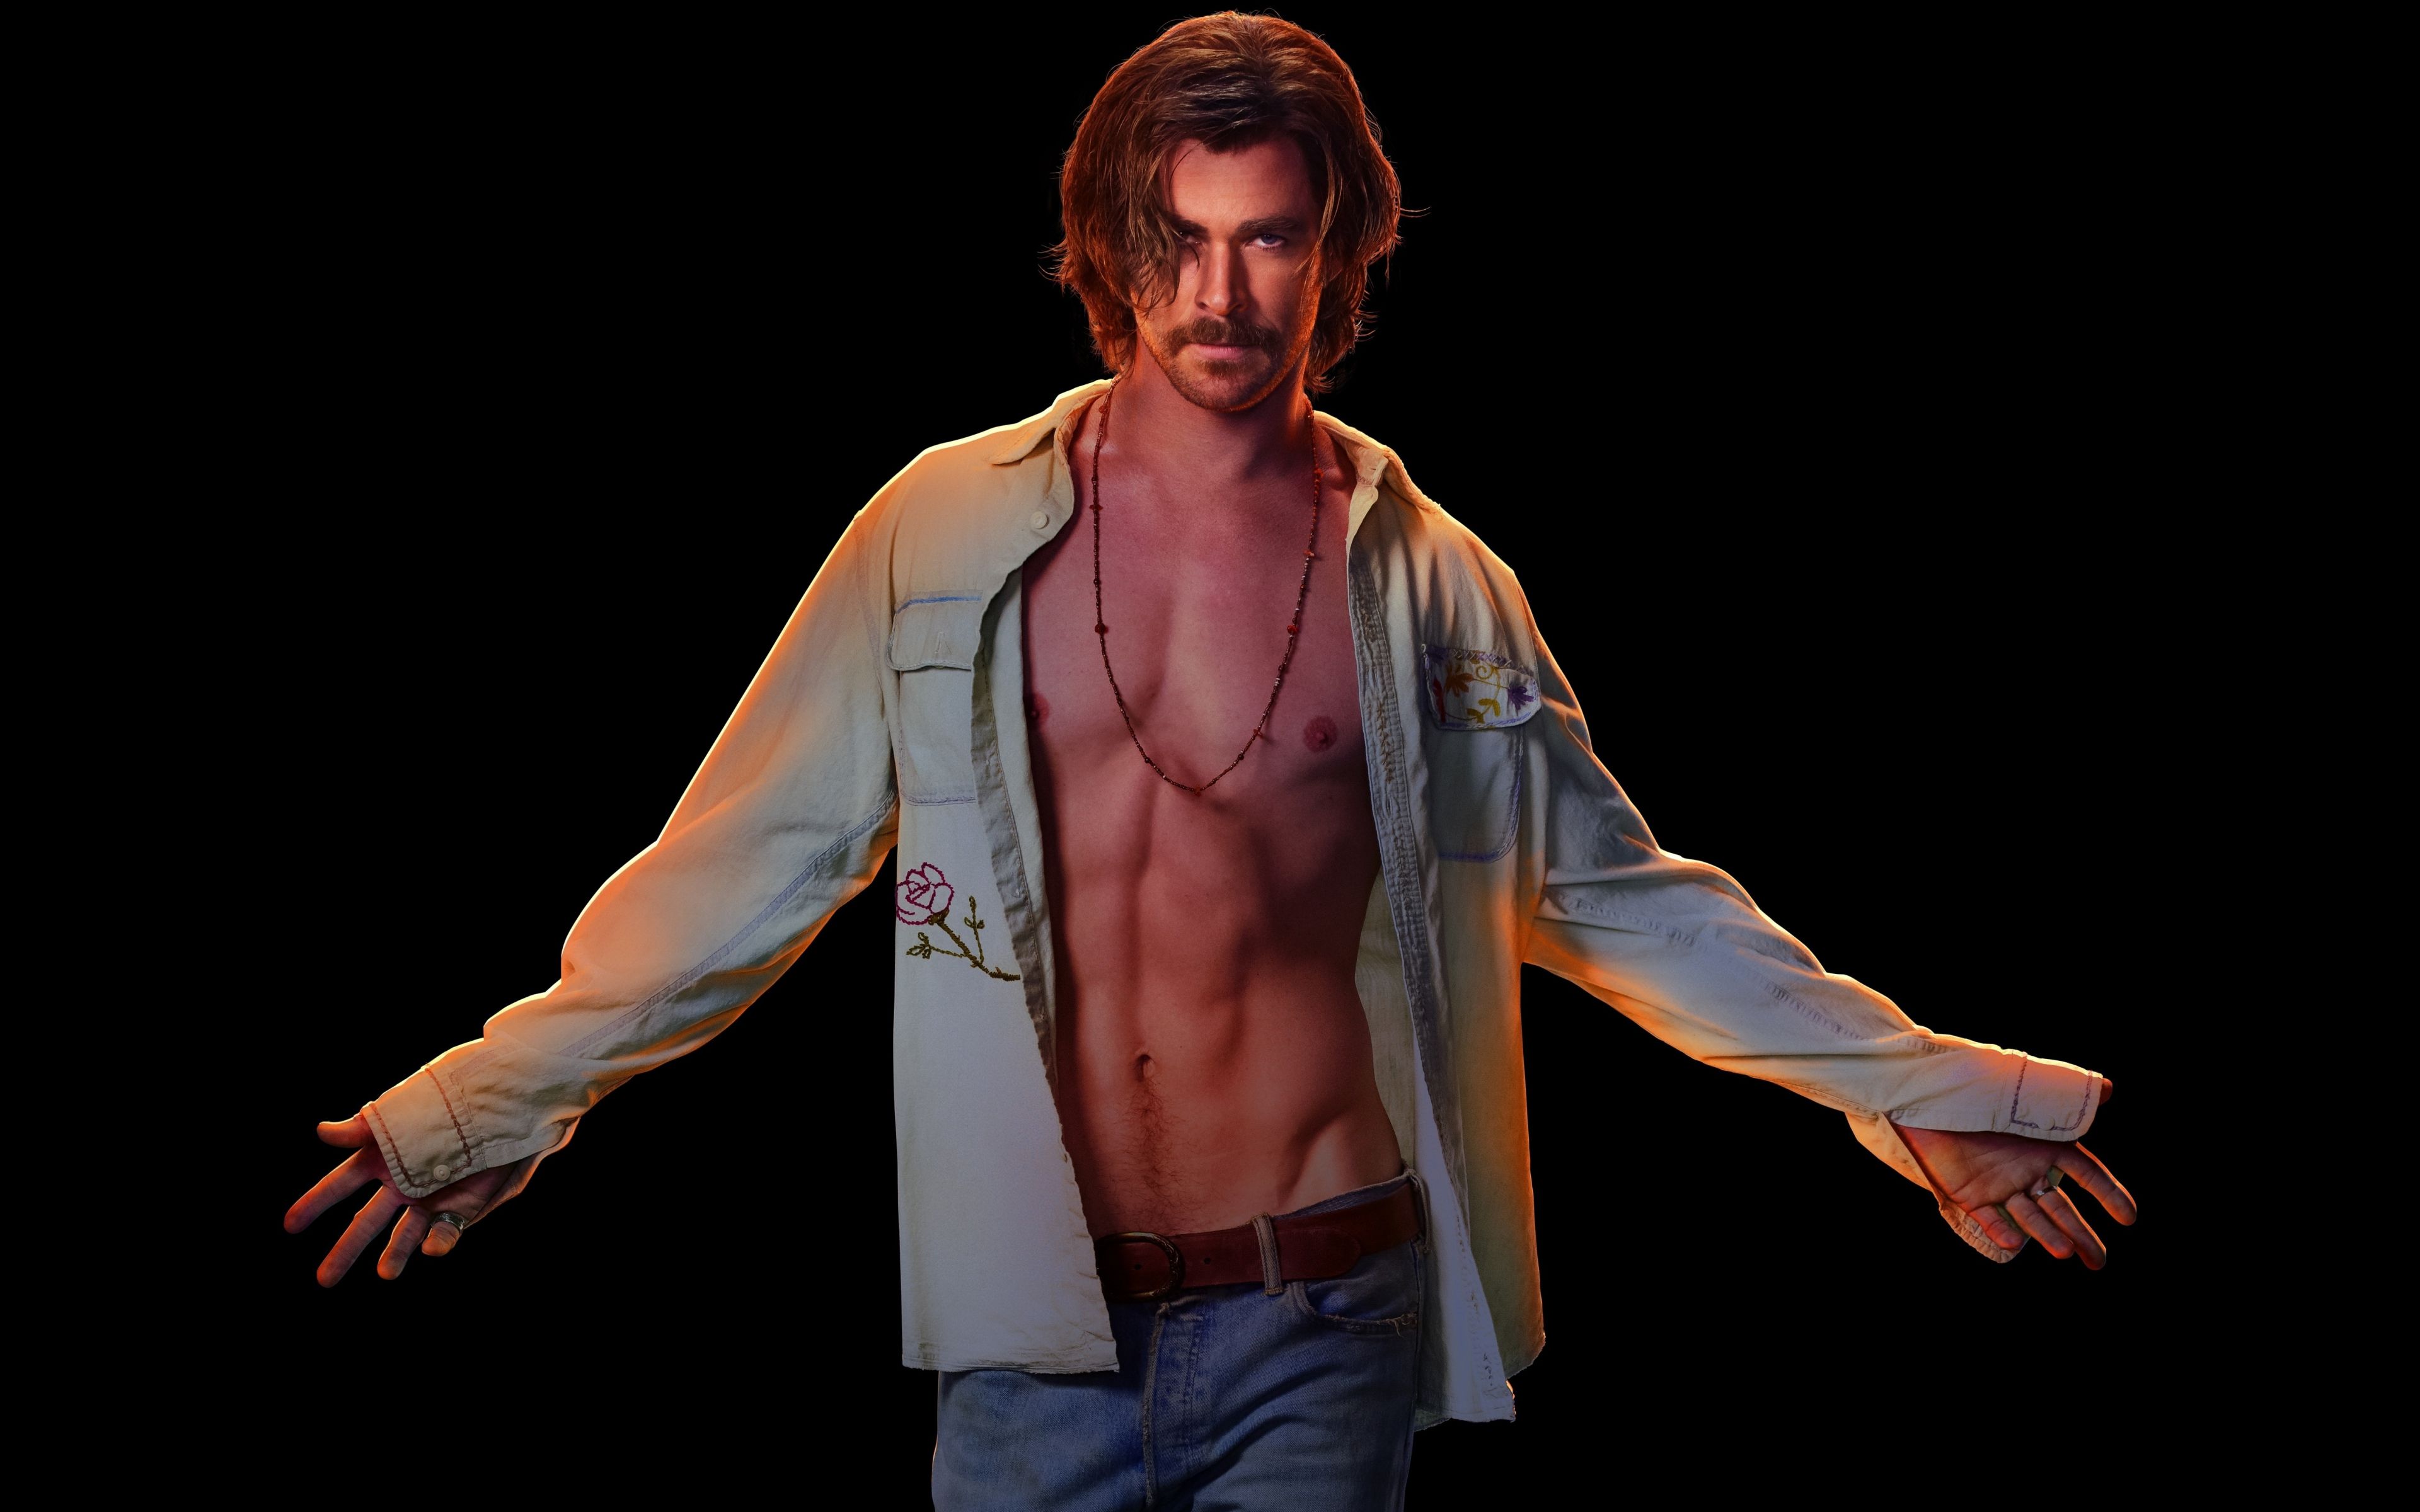 Download 3840x2400 wallpaper chris hemsworth, bad times at the el royale, celebrity, 4k, ultra HD 16: widescreen, 3840x2400 HD image, background, 14921